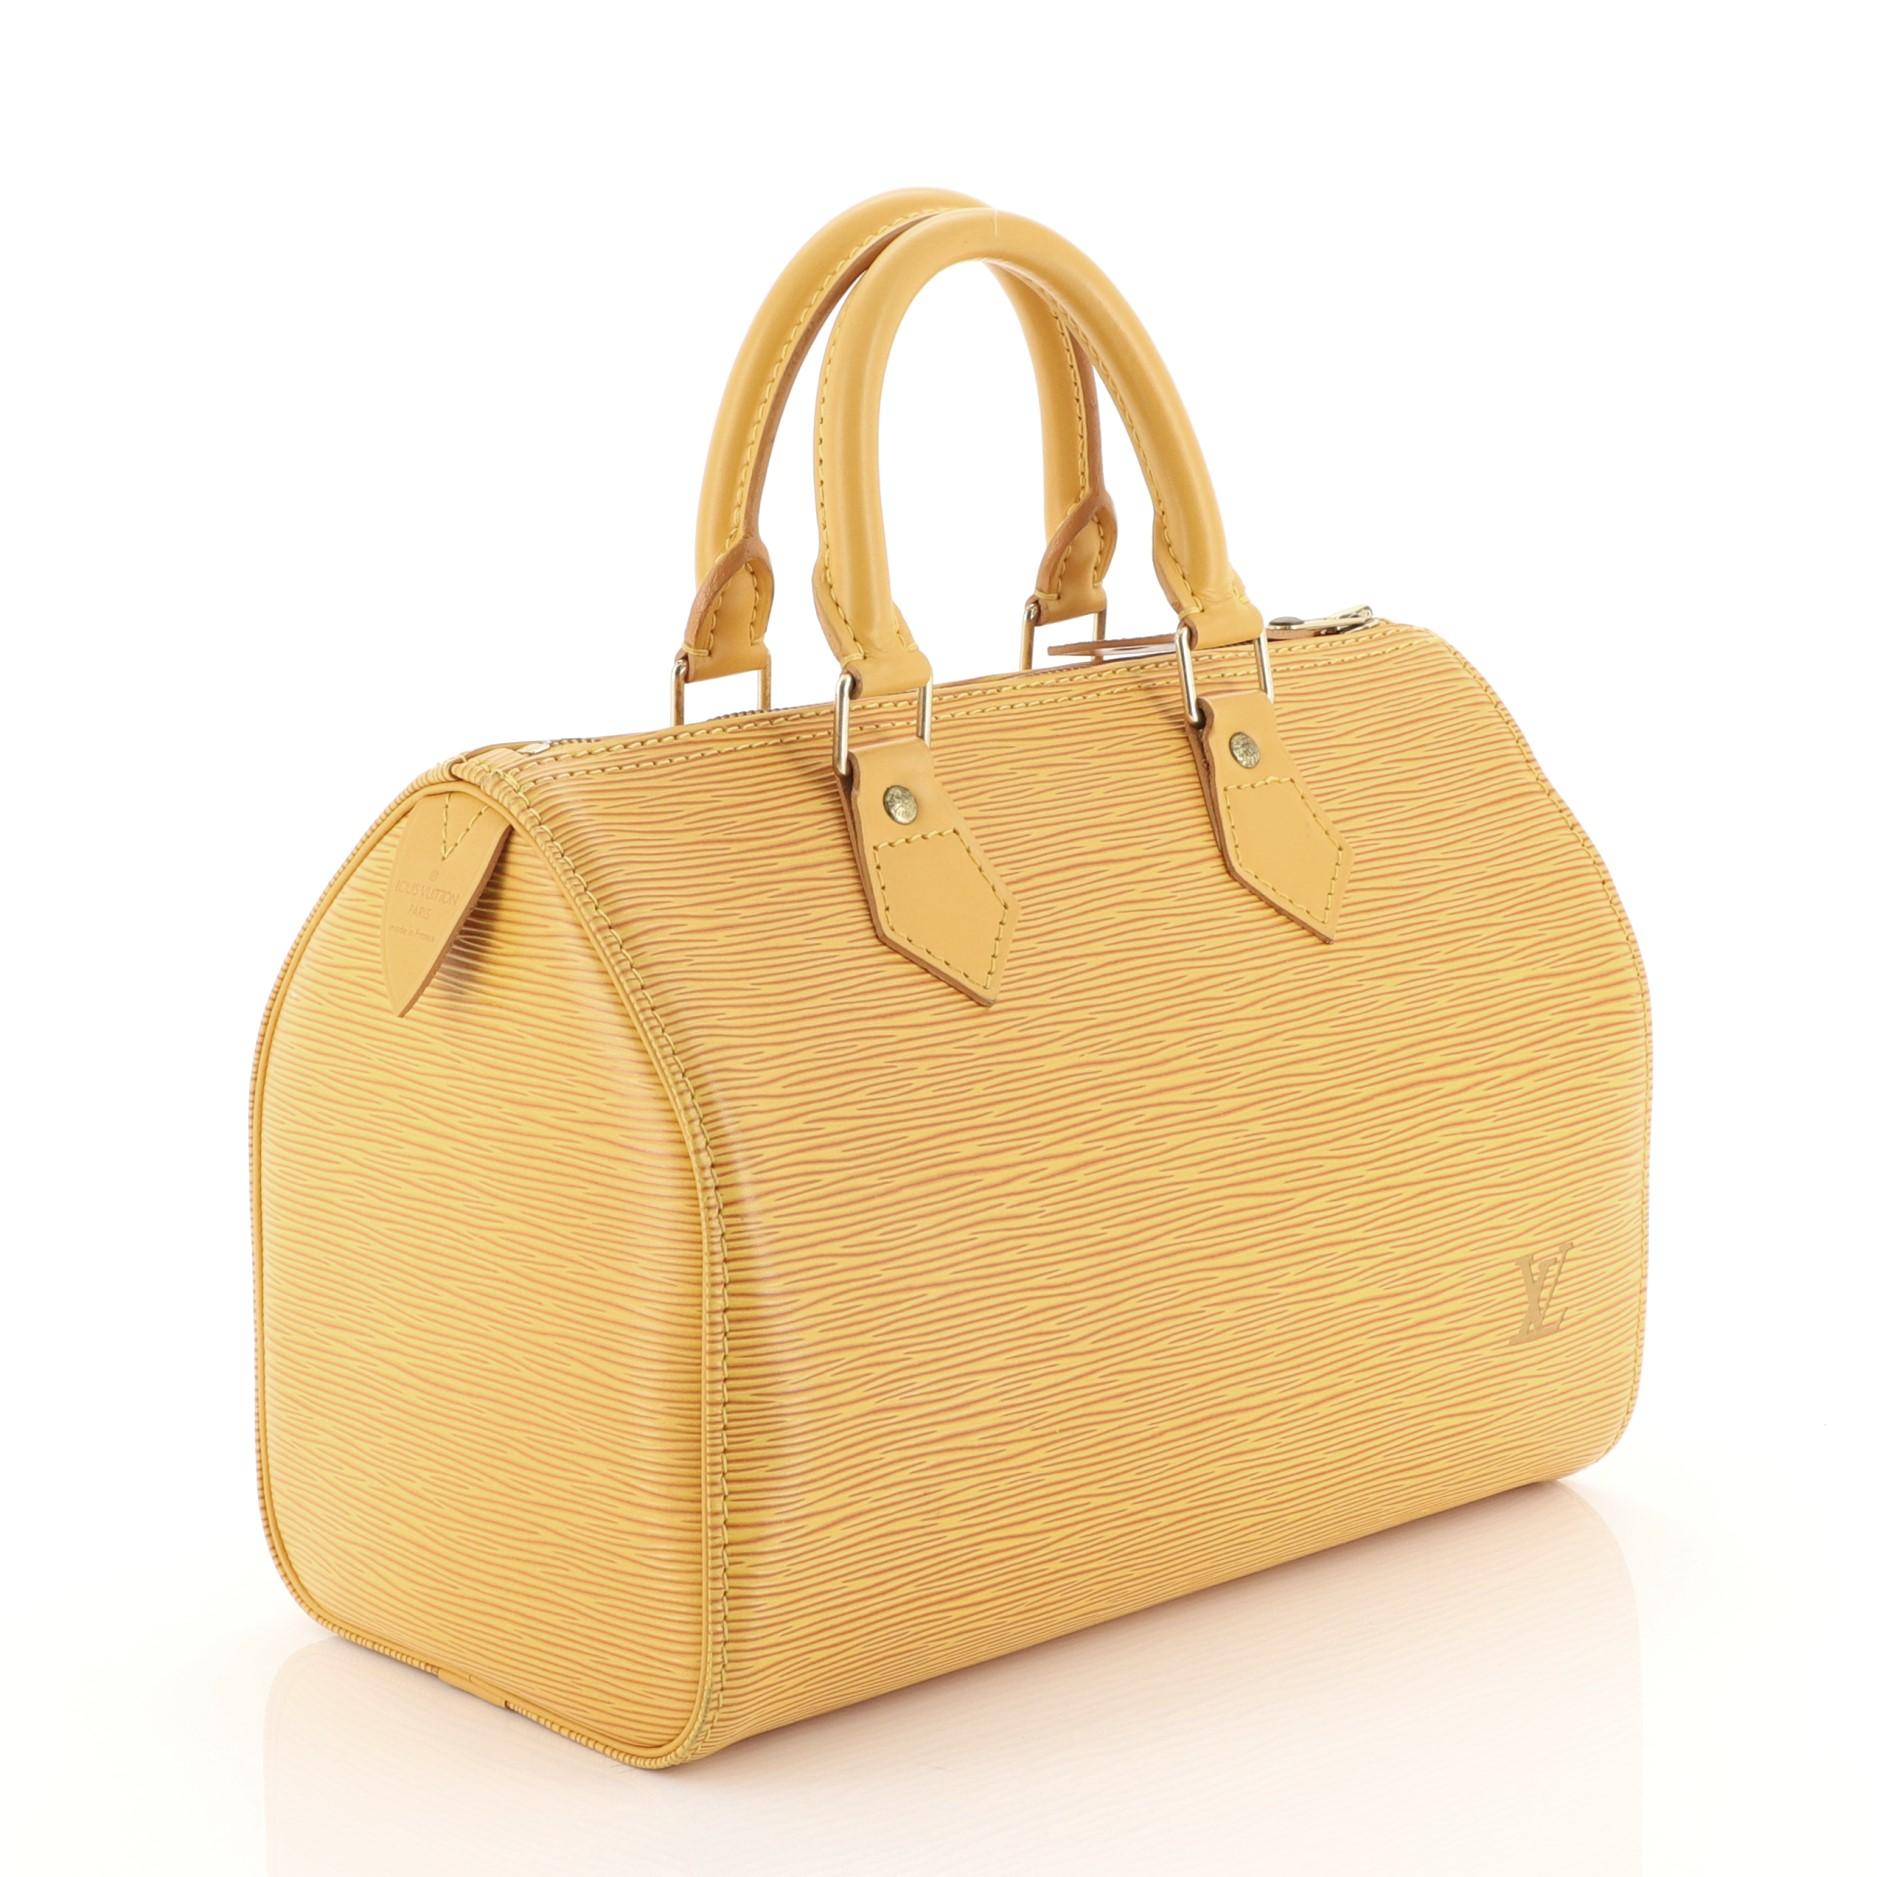 This Louis Vuitton Speedy Handbag Epi Leather 25, crafted from yellow epi leather, features dual rolled leather handles, exterior side pocket, and gold-tone hardware. Its zip closure opens to a yellow raw leather interior with slip pockets.